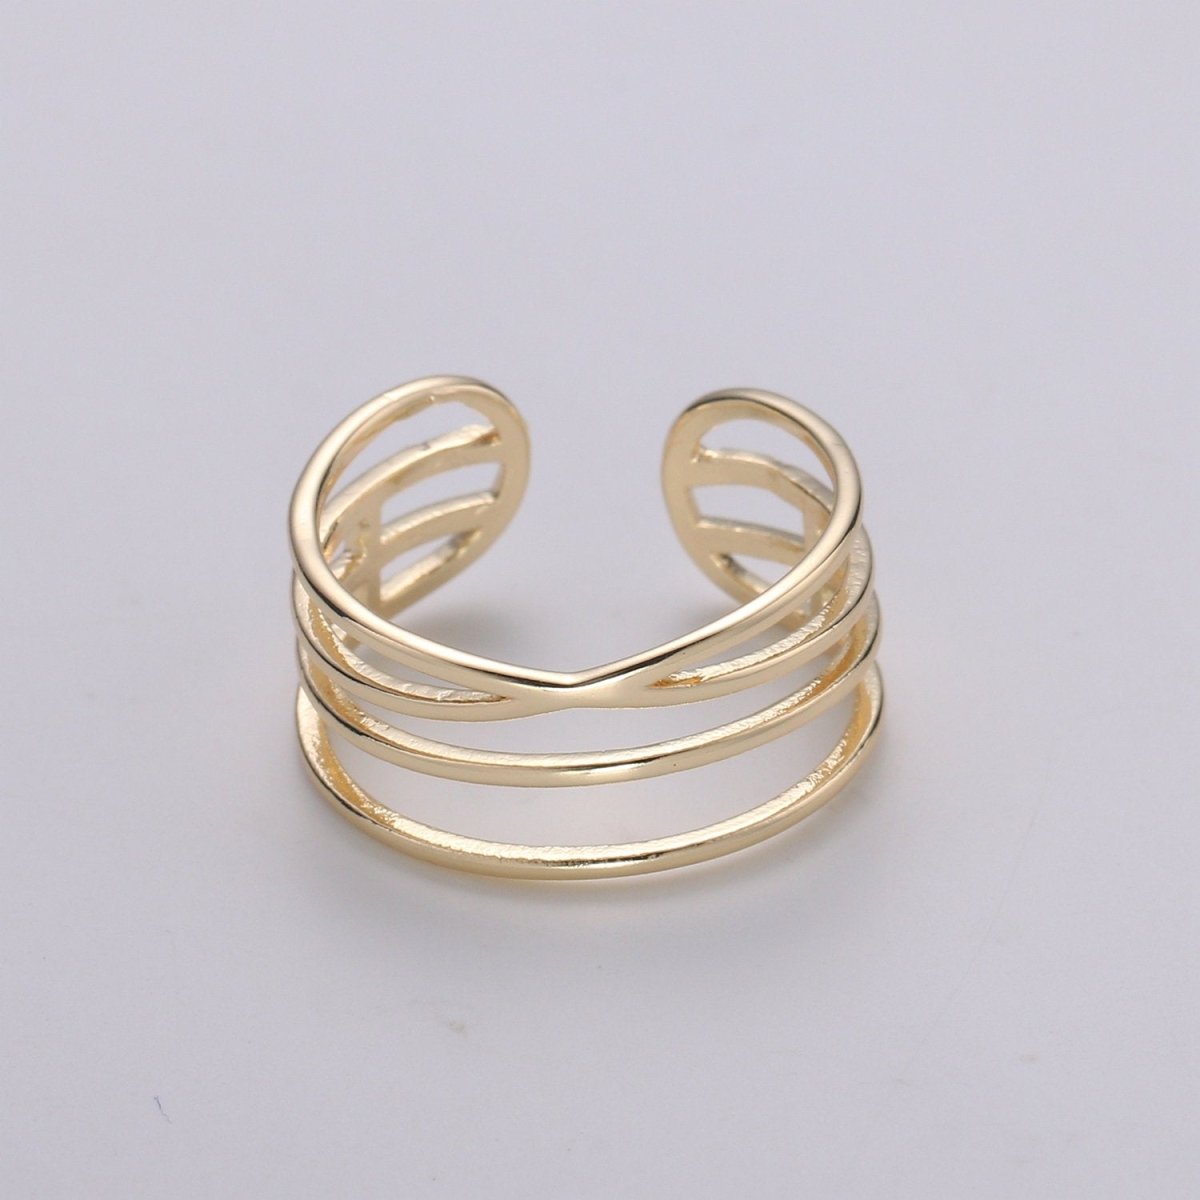 Gold Vermeil Layered Ring | Triple Band Stackable Ring | Dainty Ring Minimalist Jewelry Trendy Midriff or Pinkie Everyday Ring Open Ring R-125 - DLUXCA